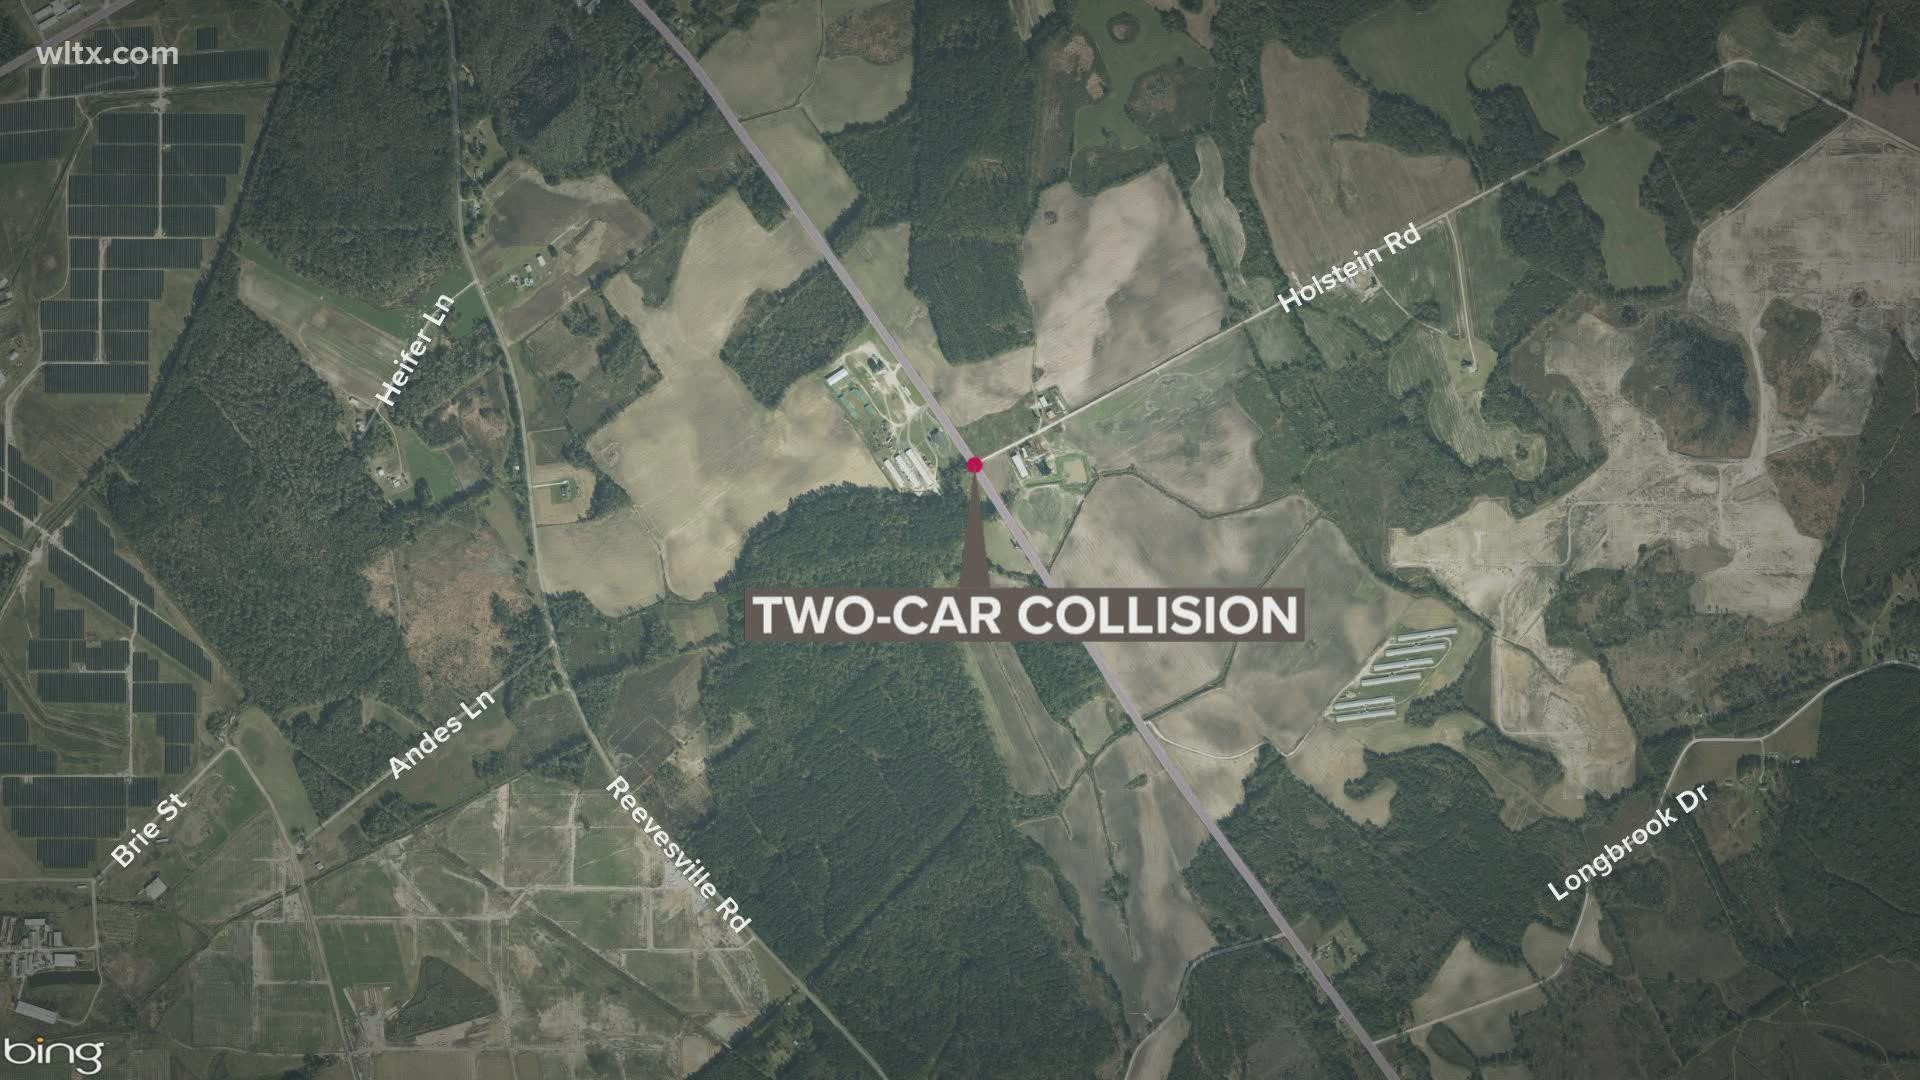 A crash in the Bowman area of Orangeburg County left one driver dead overnight, state troopers confirmed on Saturday.